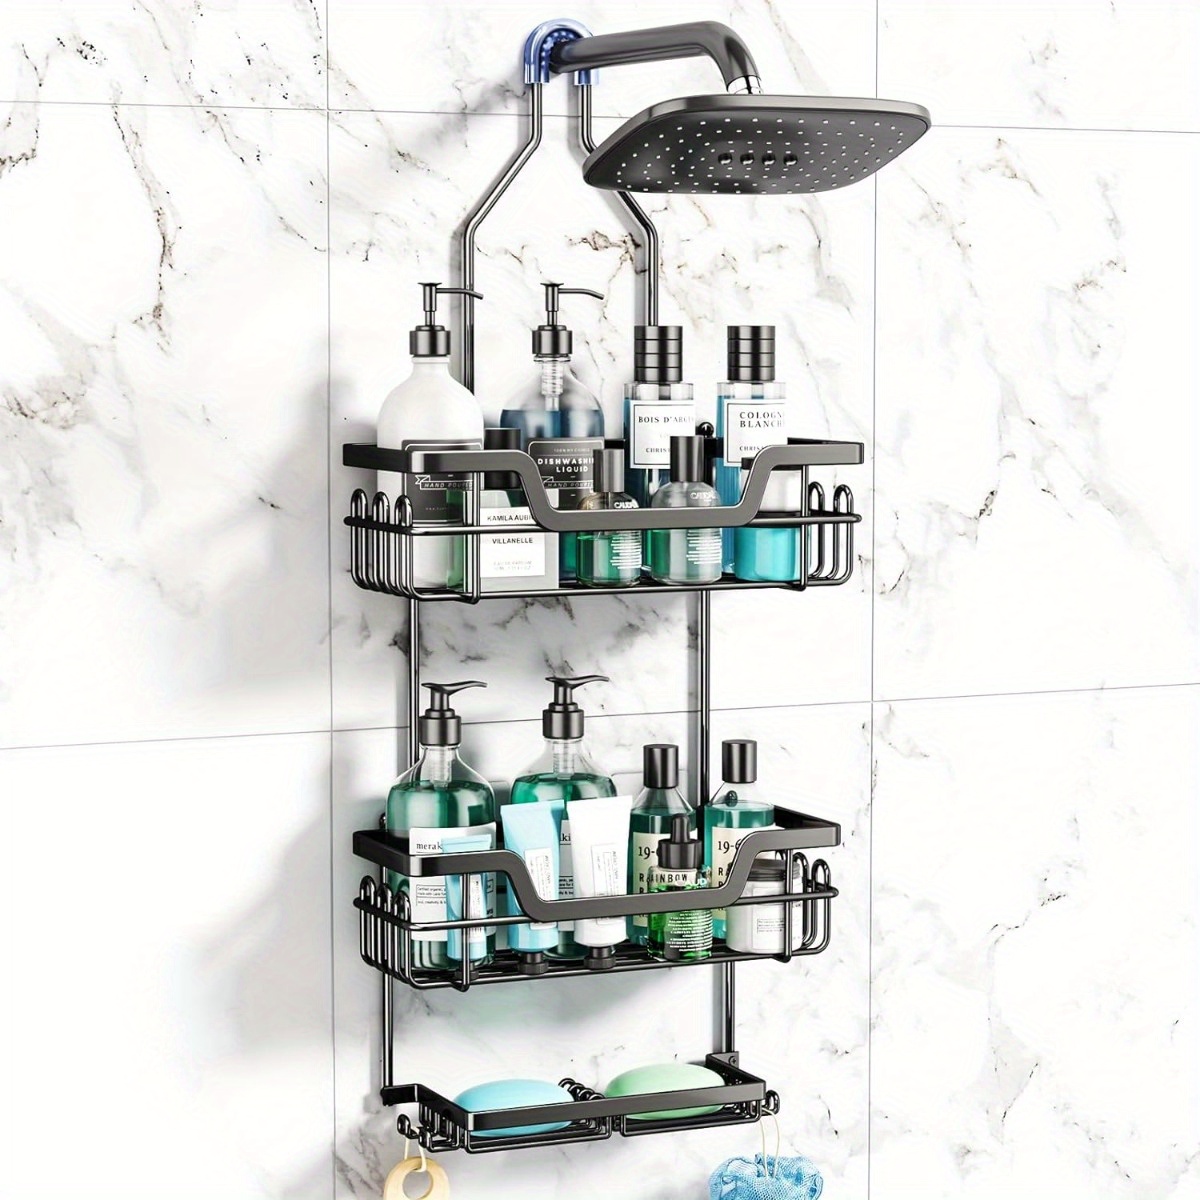 

Stainless Steel Hanging Shower Caddy, 3-tier Over Shower Organizer With Rust Resistant Design, Dual Soap Holder And 16 Hooks For Bathroom Storage